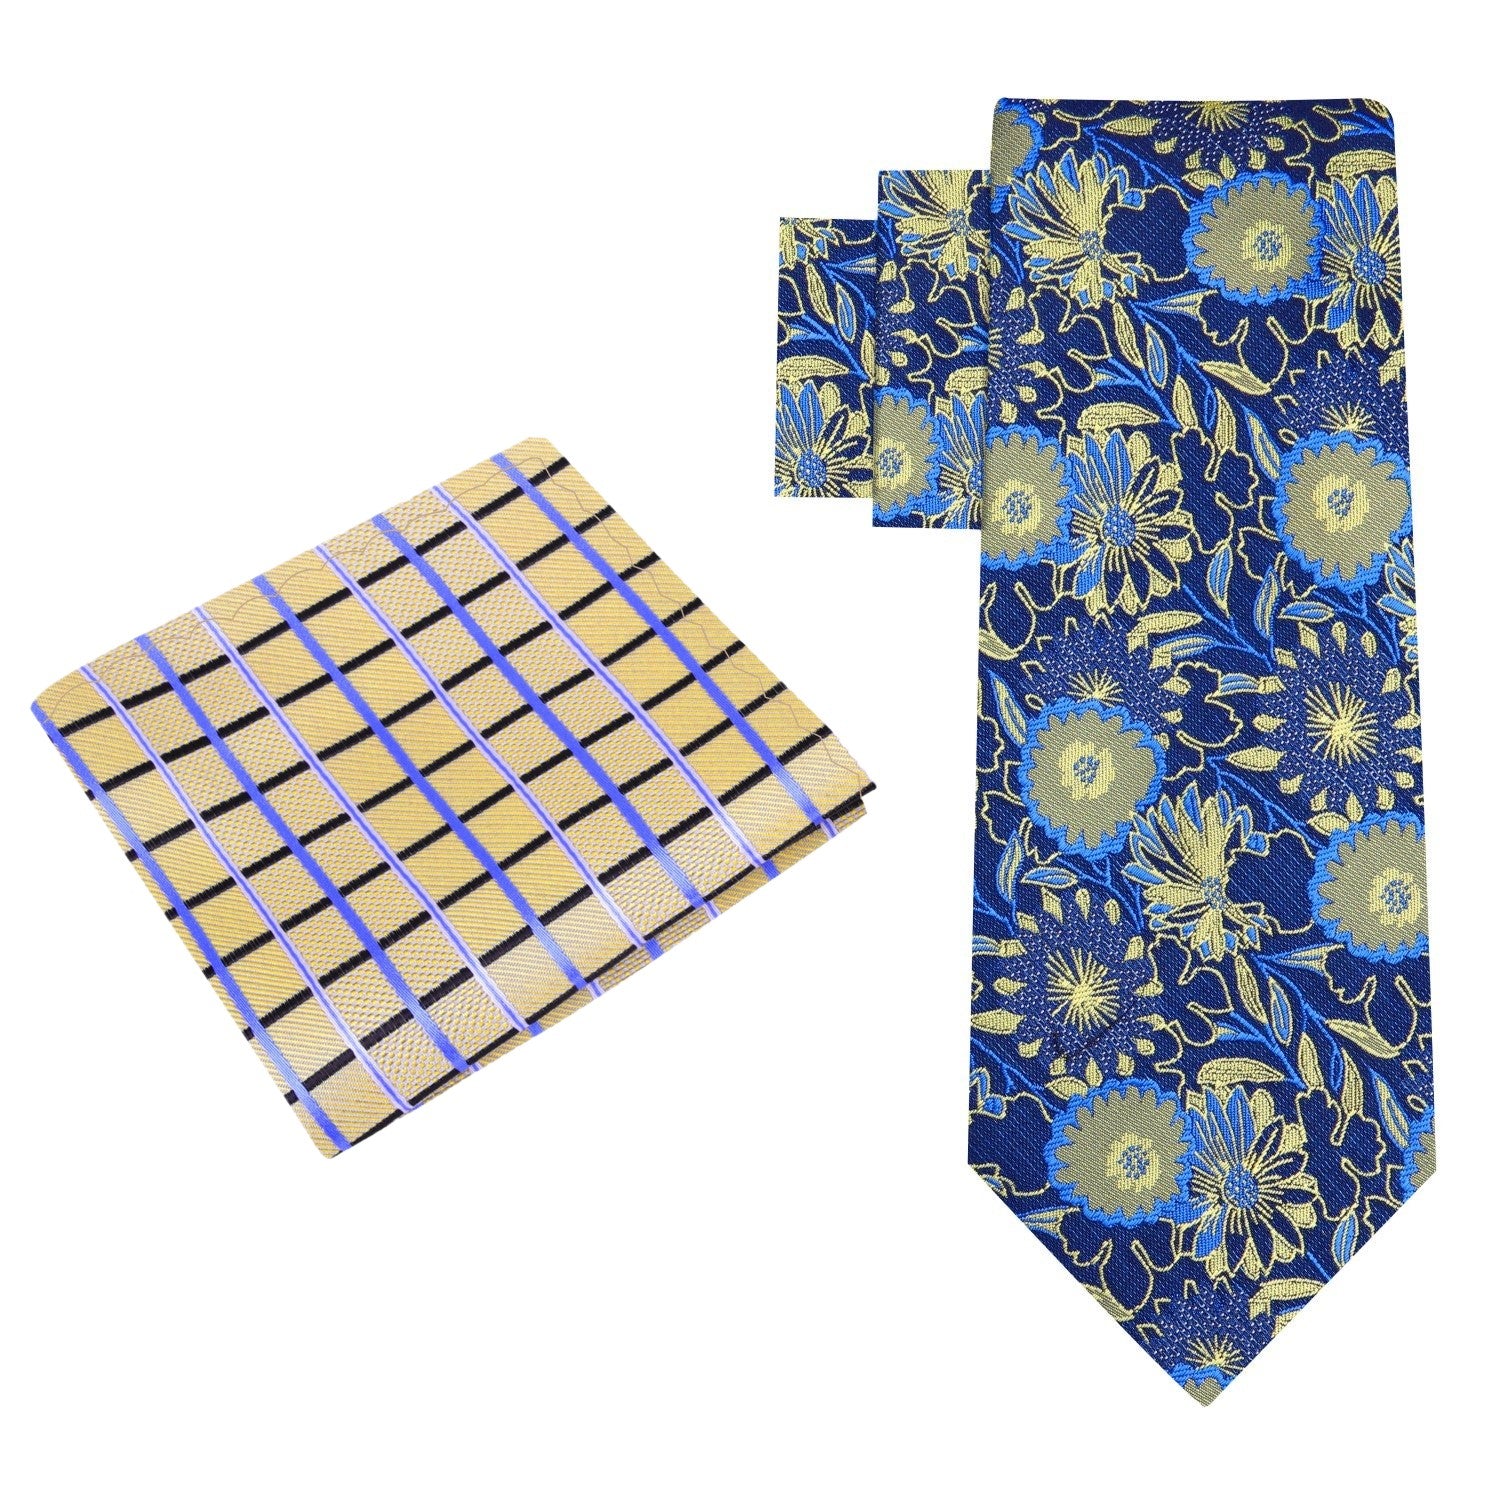 Alt View: Dark Blue and Yellow Gold Floral Tie and Pocket Square